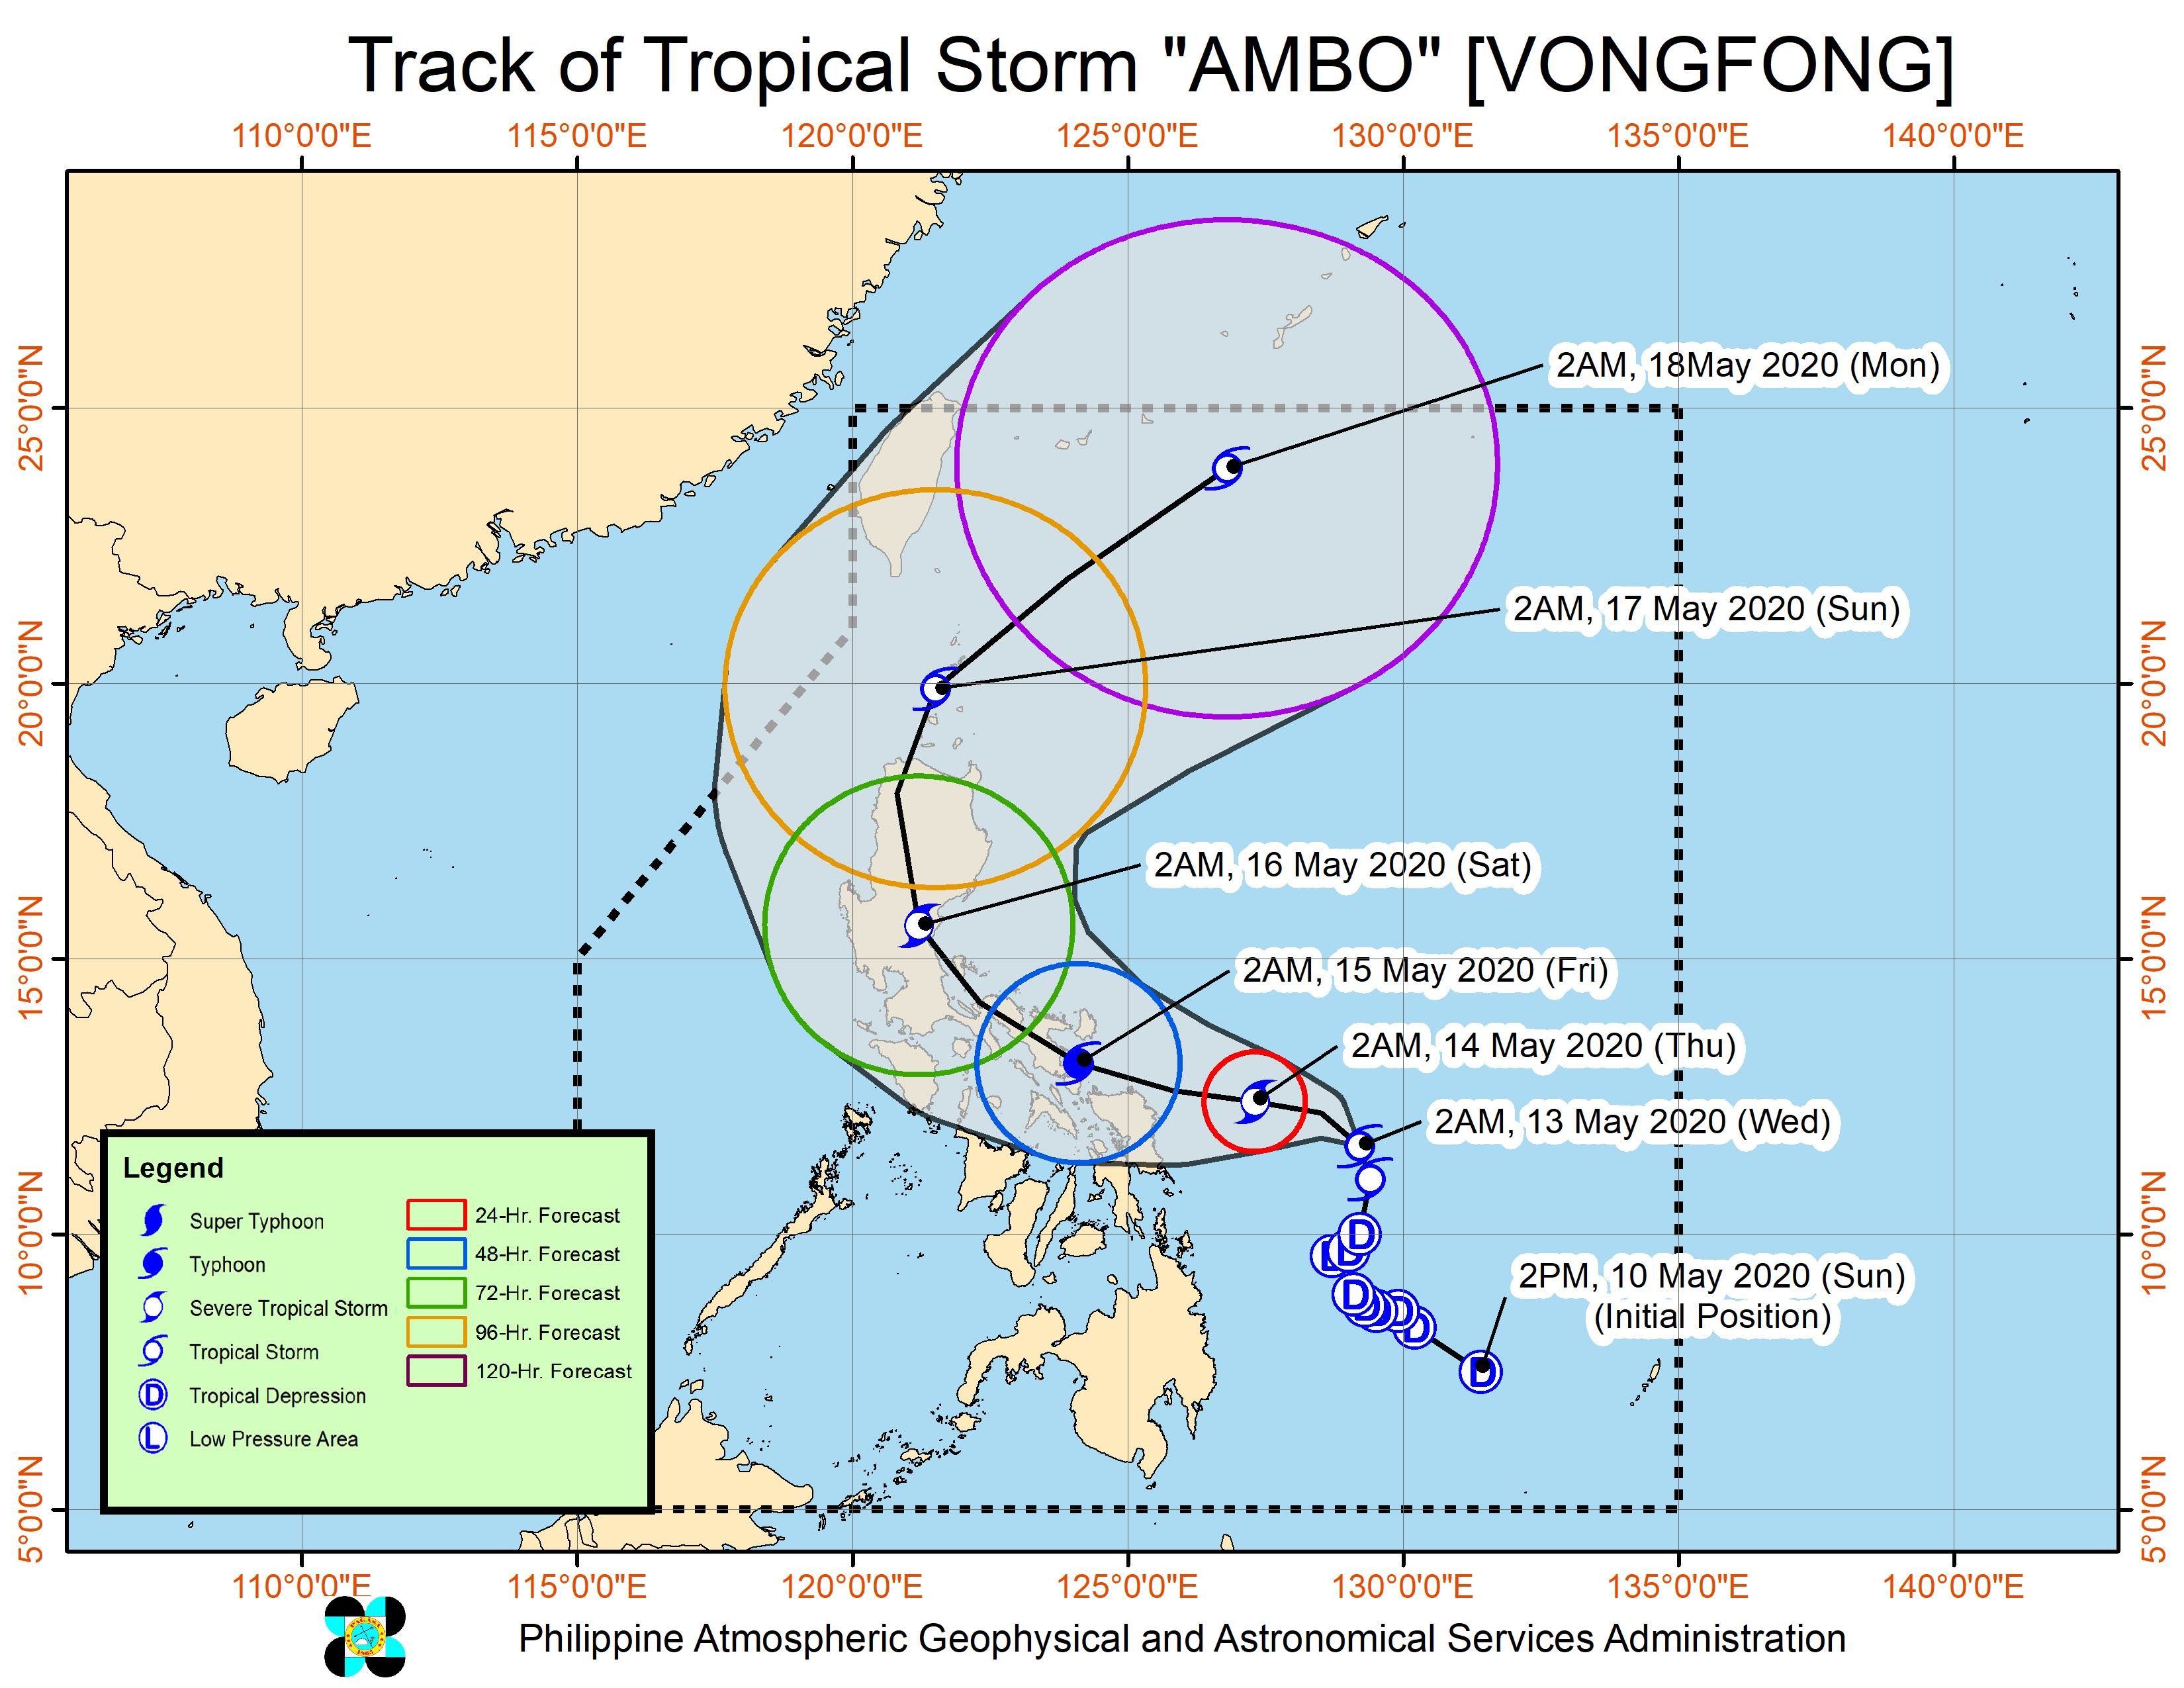 Forecast track of Tropical Storm Ambo (Vongfong) as of May 13, 2020, 5 am. Image from PAGASA 